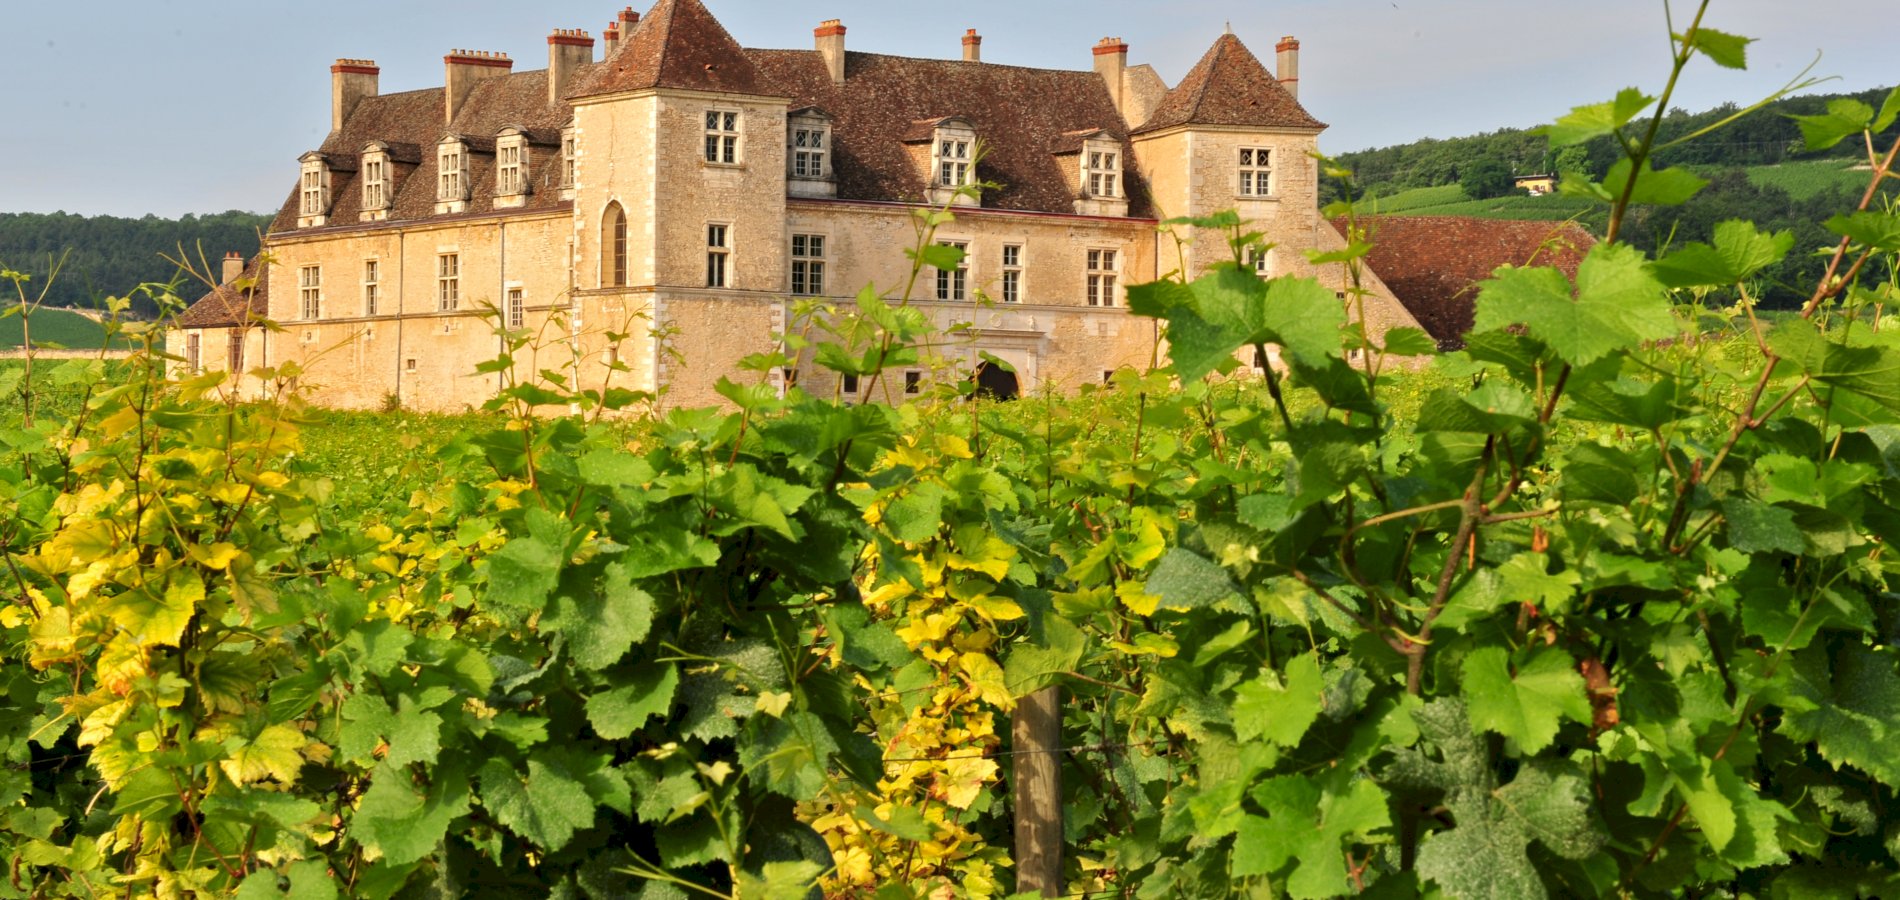 Ophorus Tours - 4 Days Private Burgundy Wine Tour Packages - Dijon - 5* Hotel